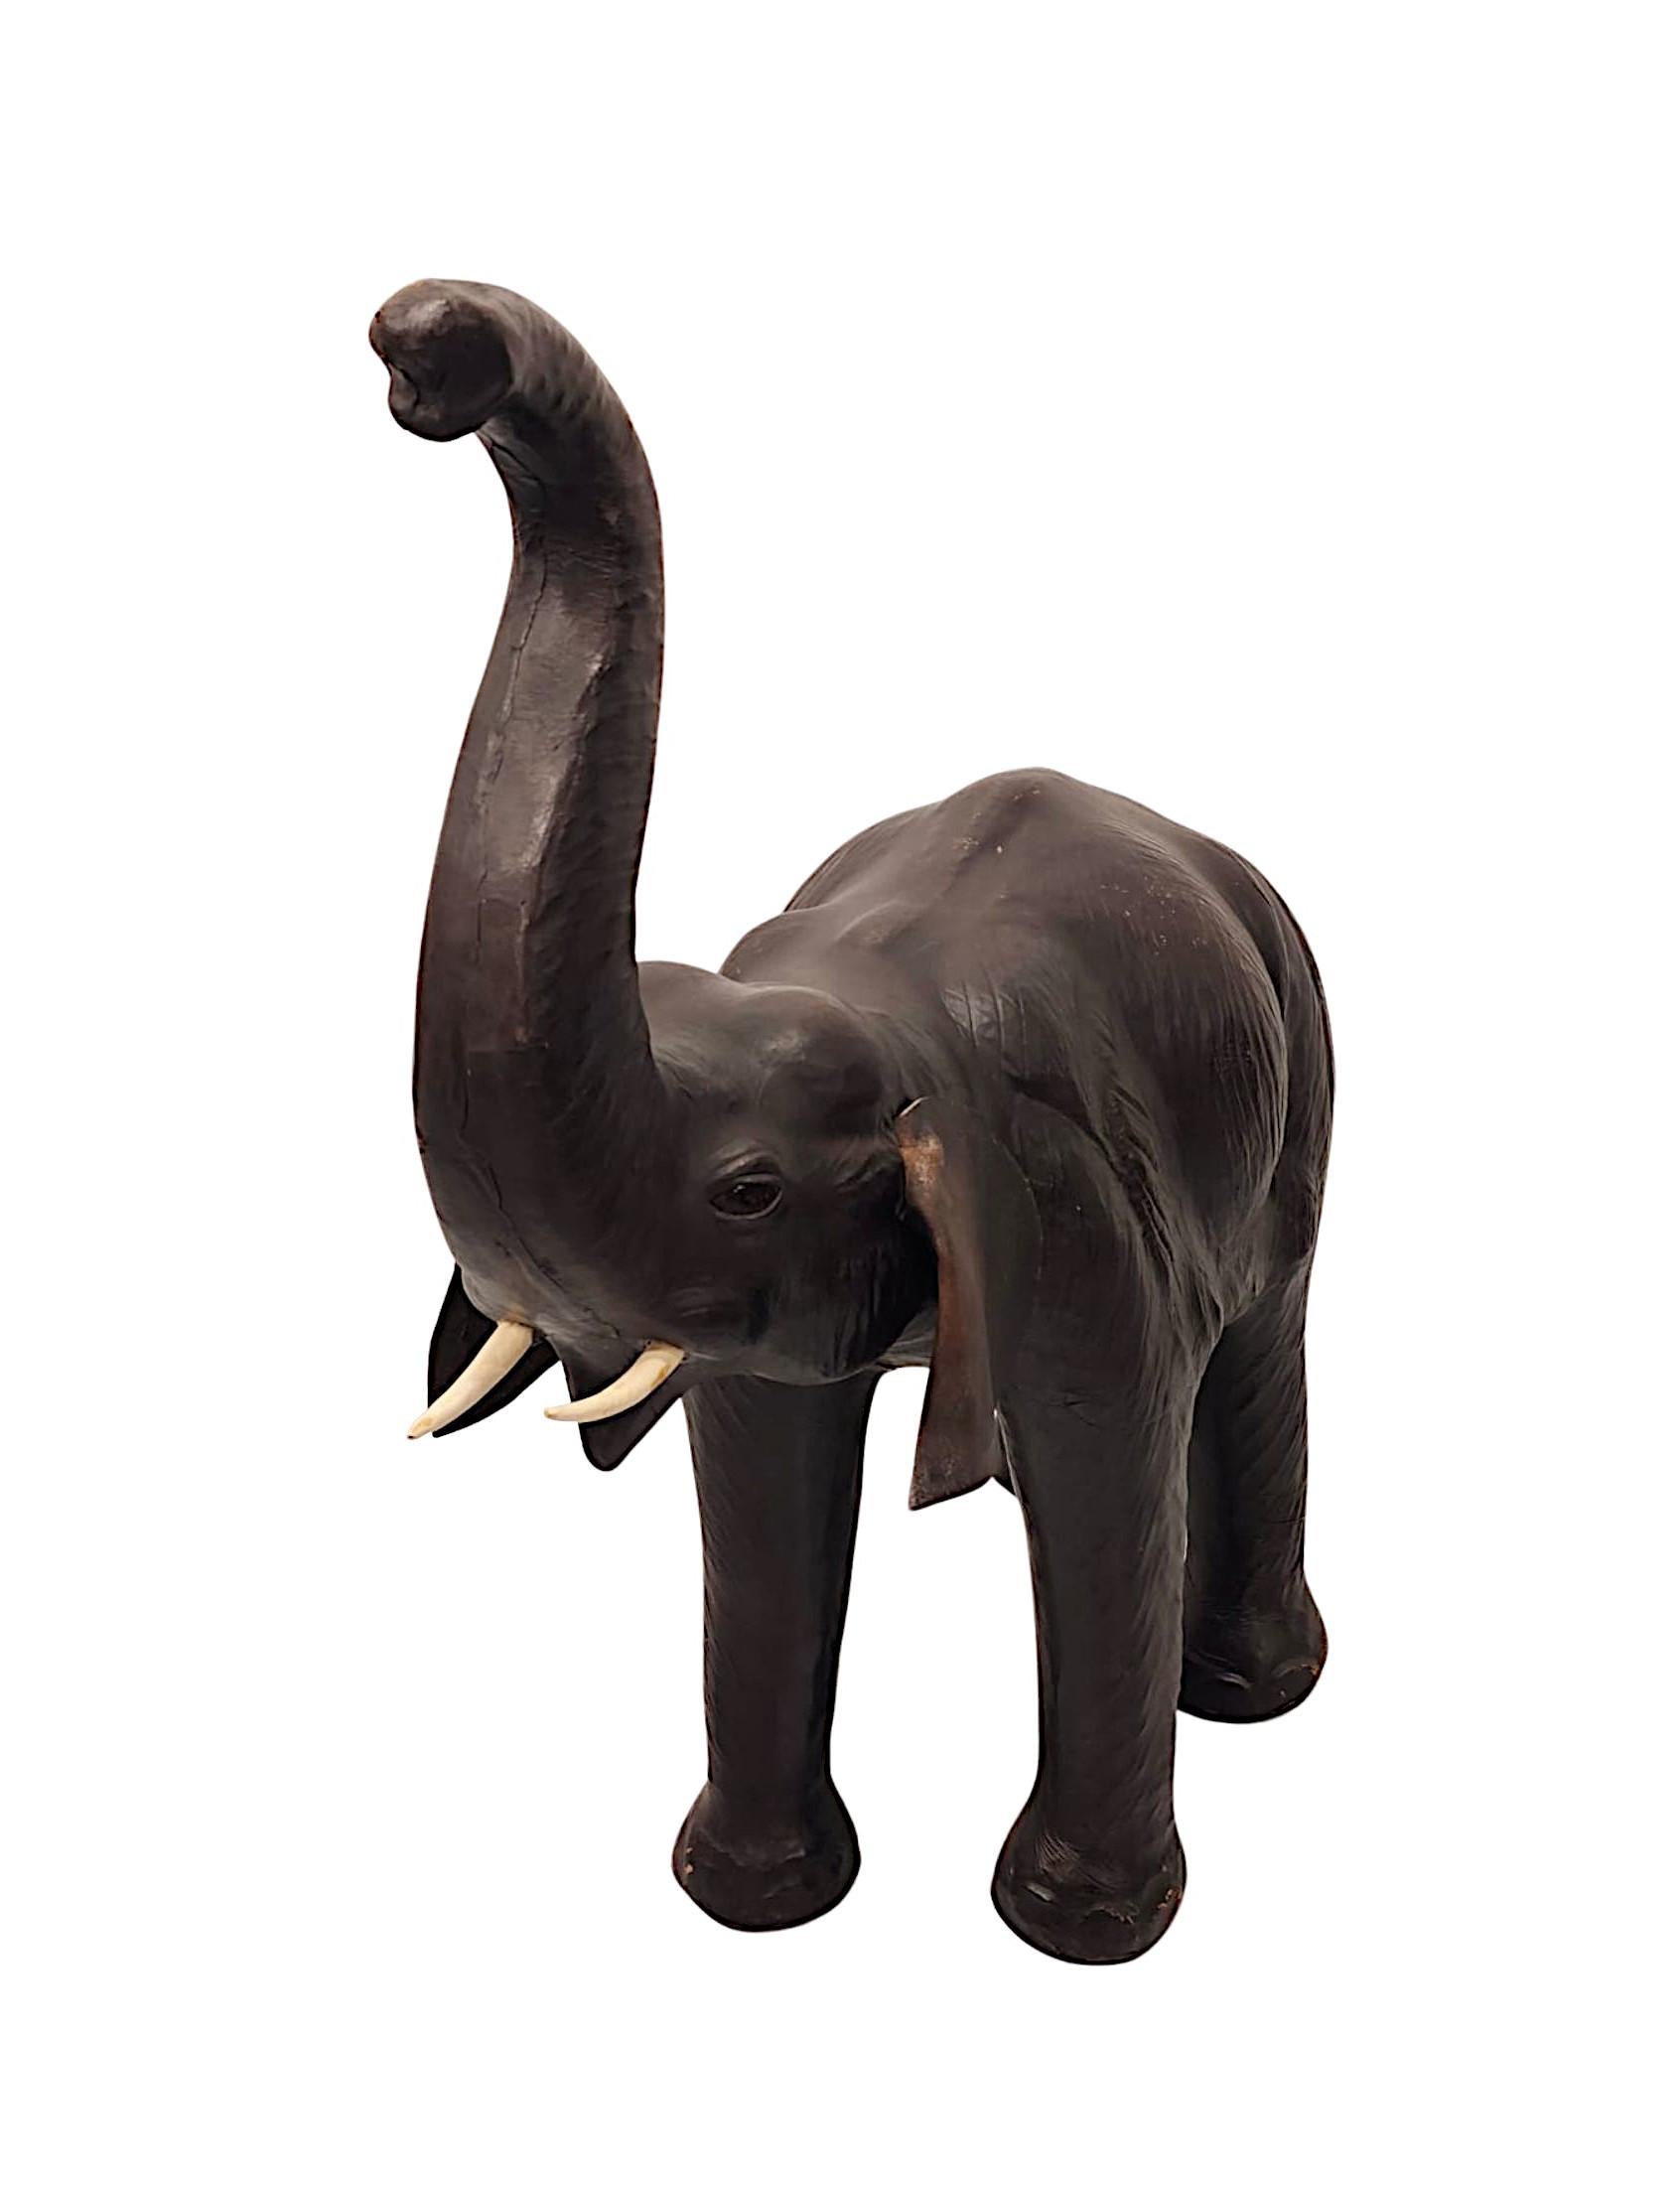 A fabulous 20th Century animalier leather sculpture of grand proportions and exceptional quality, depicting an elephant striding with trunk raised, superbly modelled, finely detailed and with gorgeously rich patination to the leather.